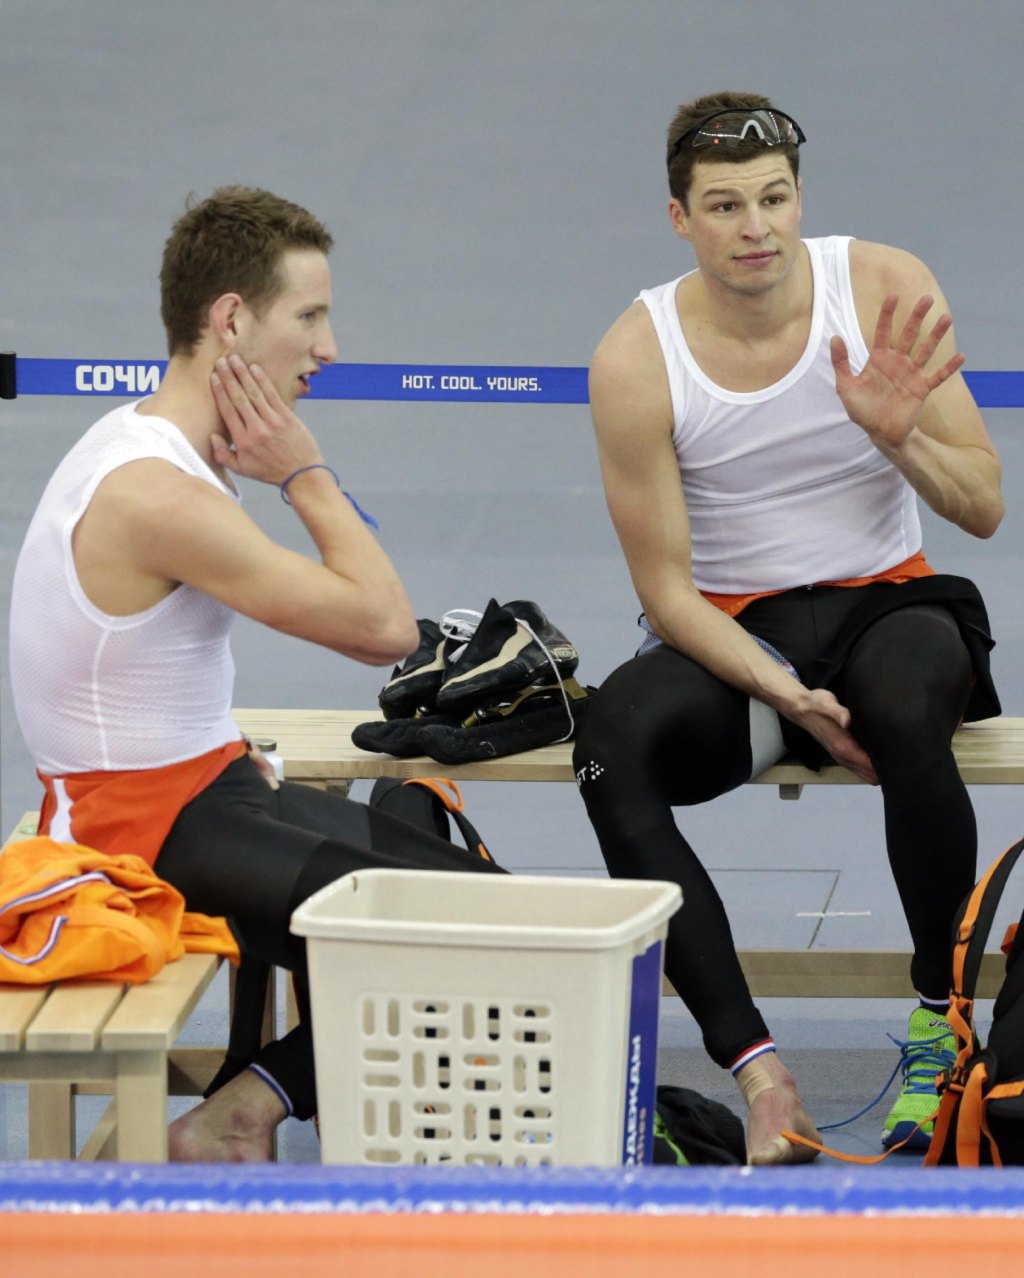 Sven Kramer of the Netherlands, right, waves as teammate Jan фото (photo)